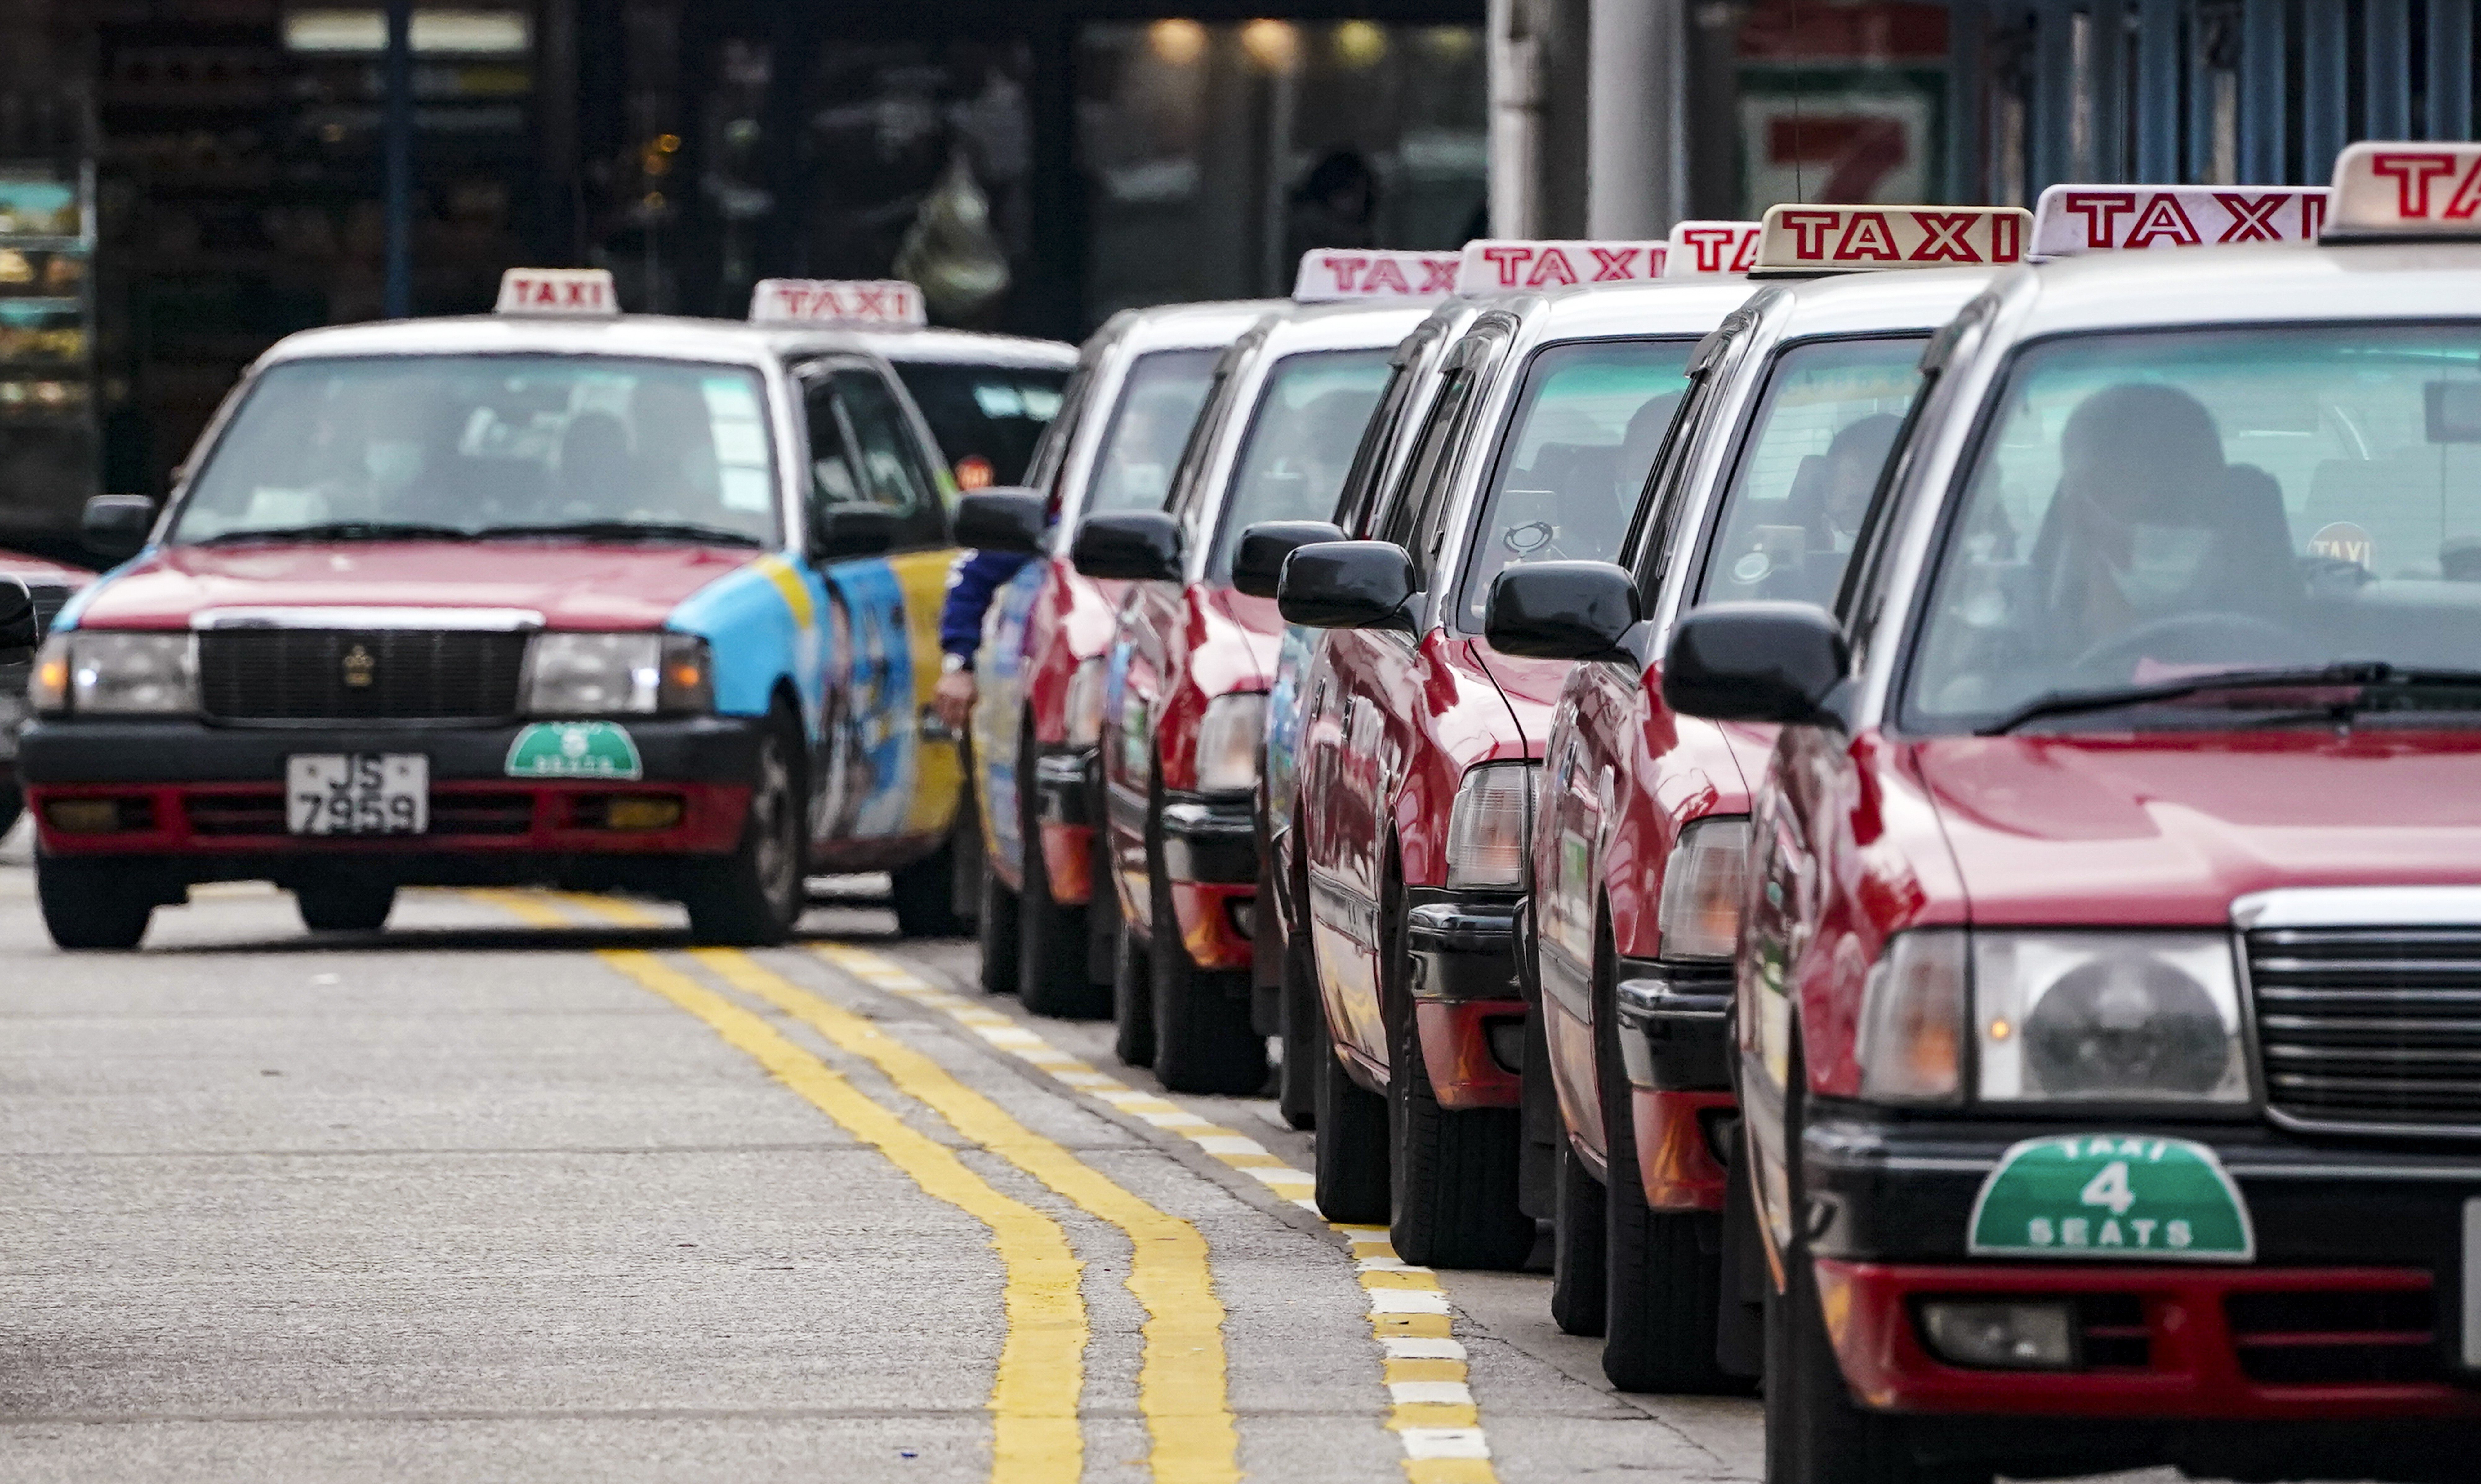 Hong Kong’s most popular cab-hailing app, HKTaxi, is now owned by Uber. Photo: Felix Wong